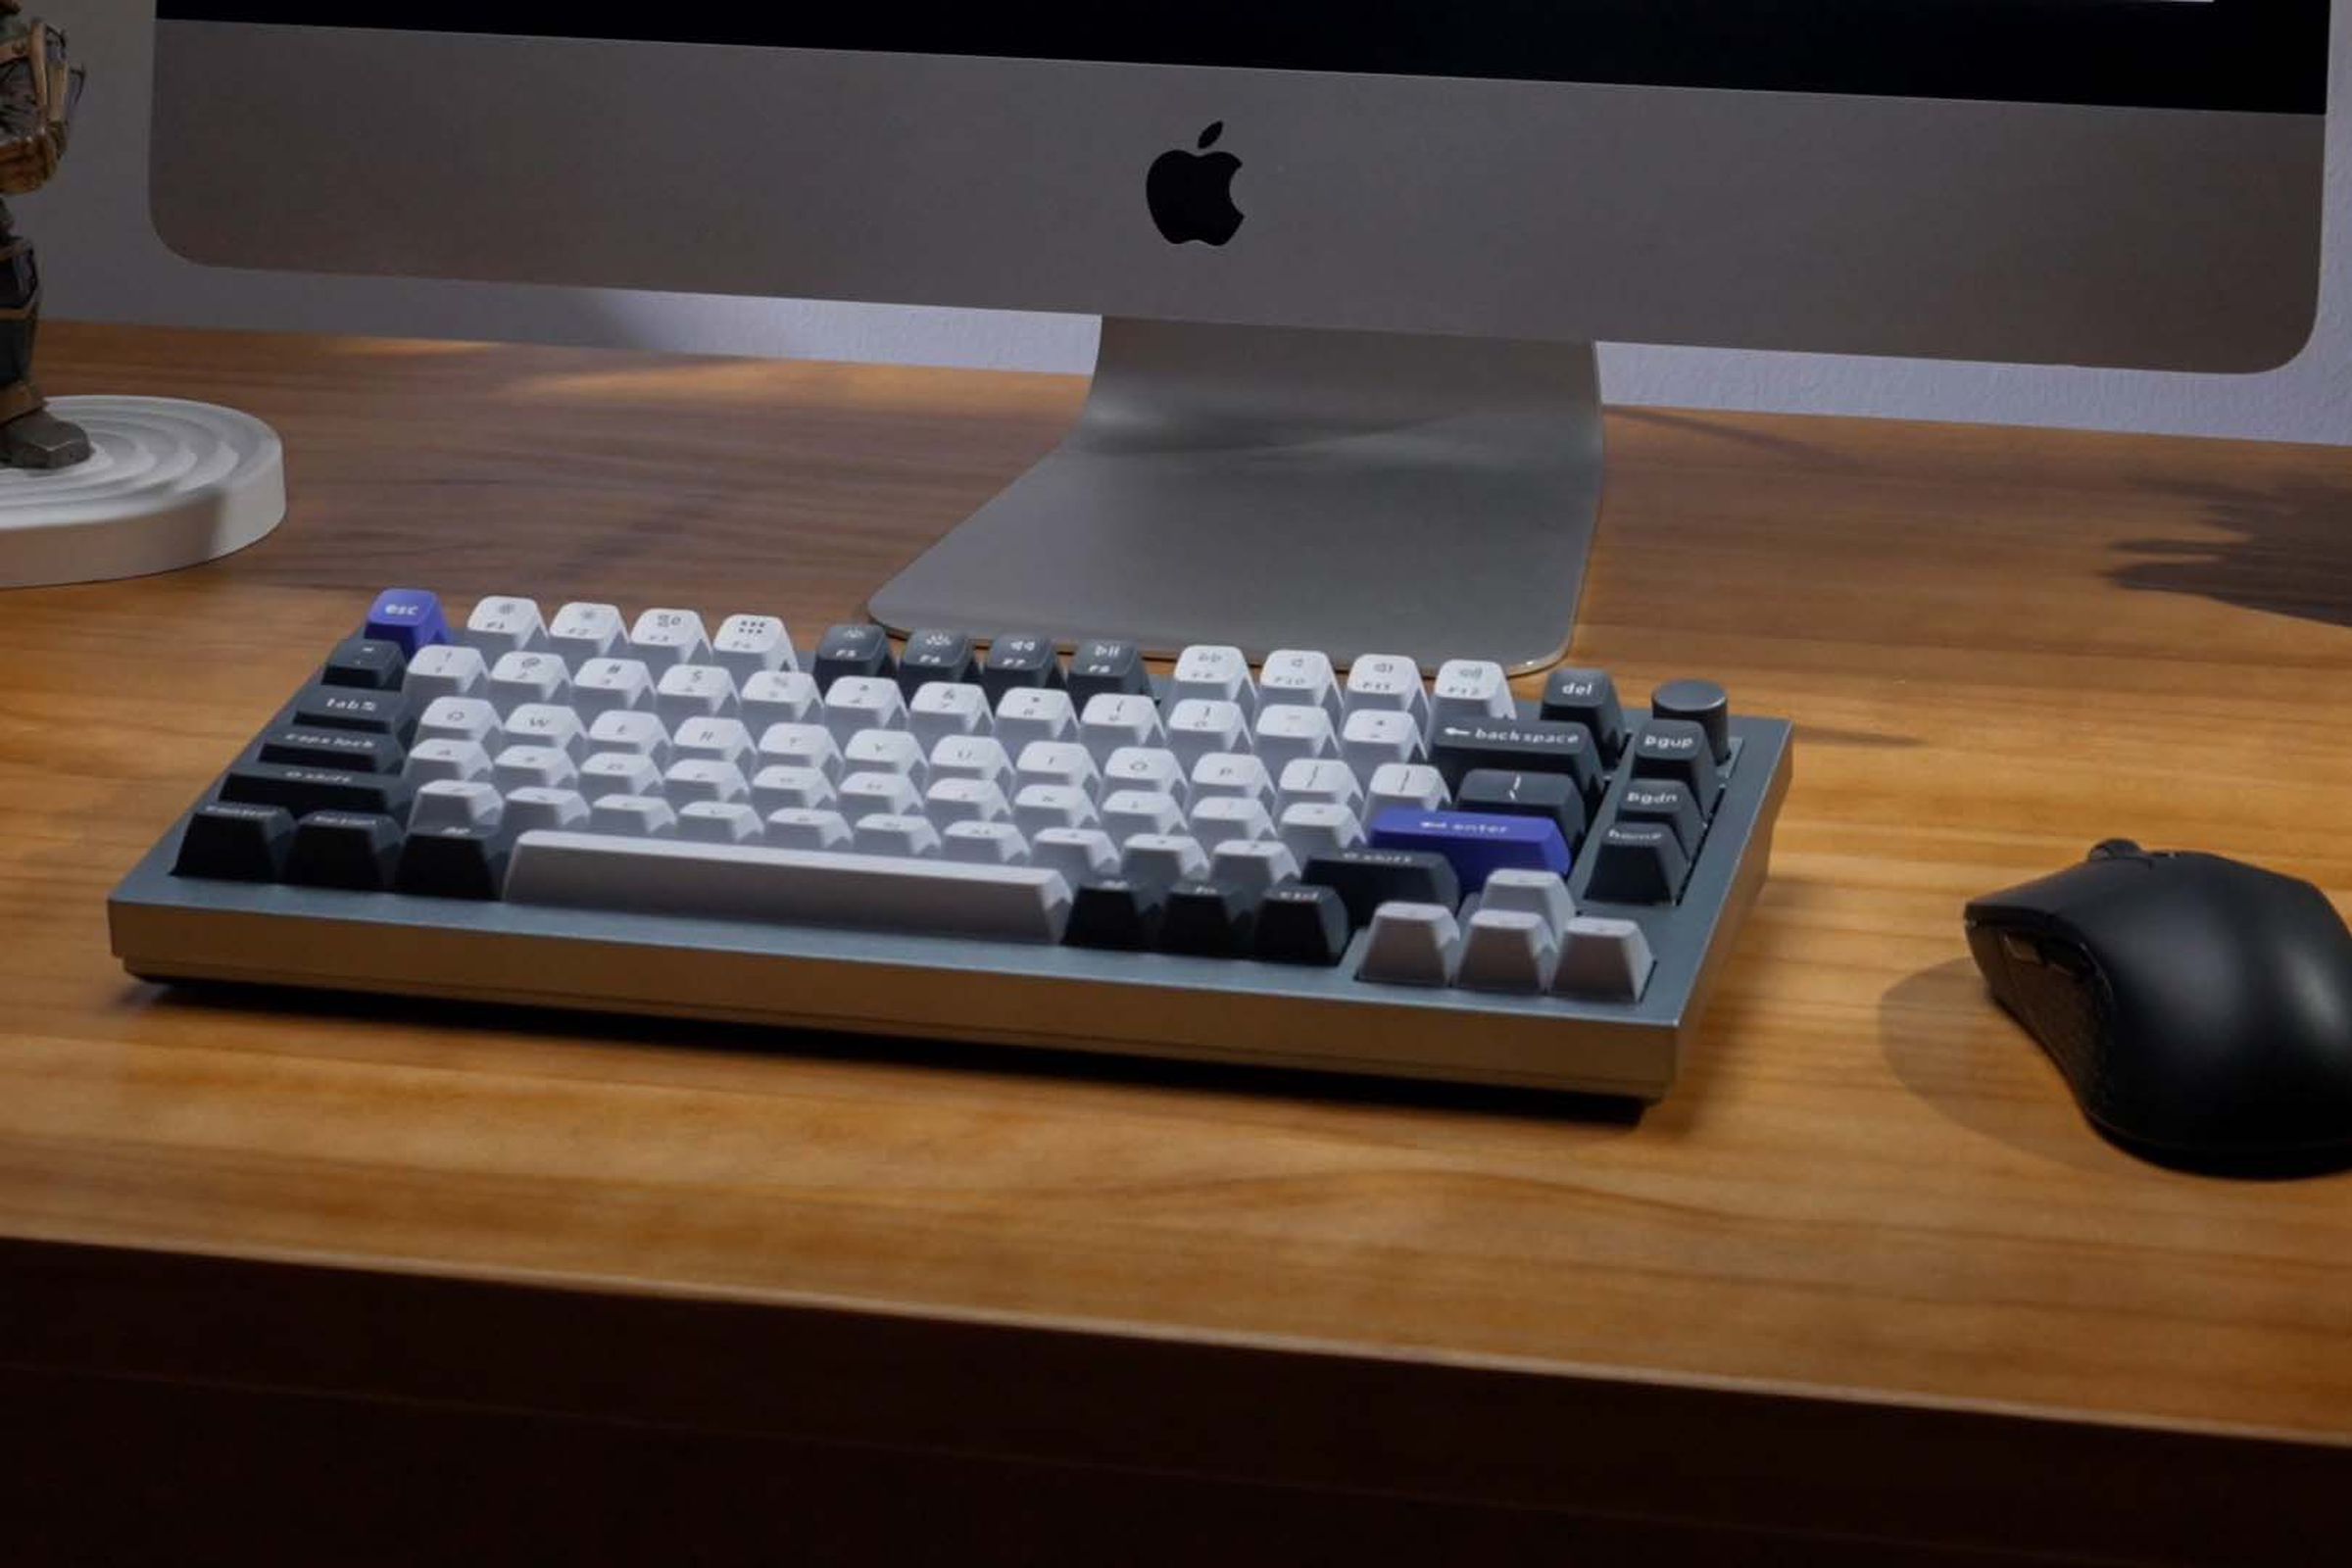 Keychron Q1 Pro in front of an iMac.